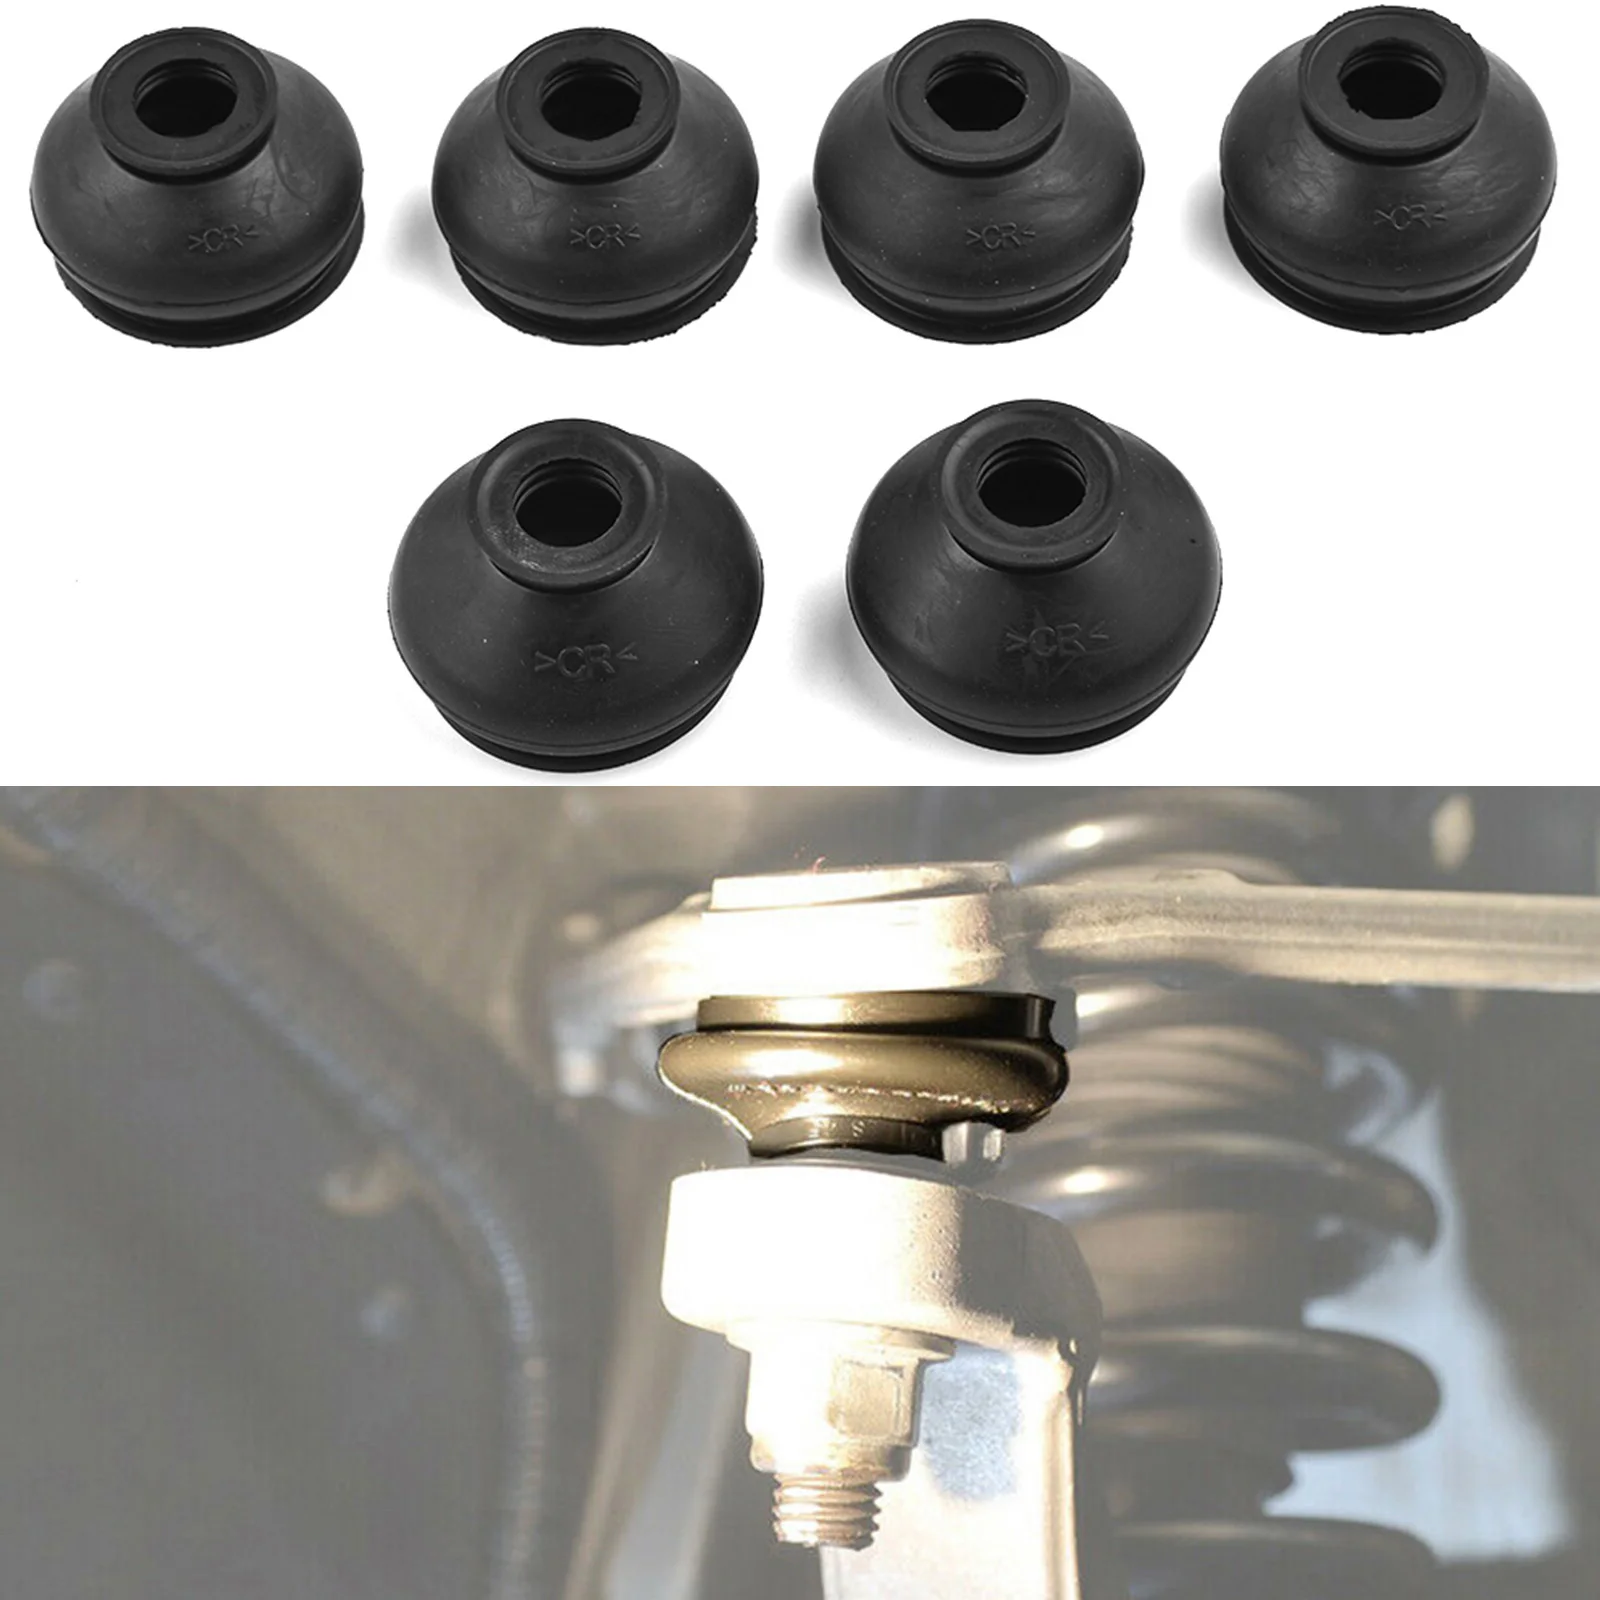 Car Dust Boot Covers Accessories Ball Joint Universal Vehicle 6 Pcs/set Decor Gaiters Parts Replacement Rubber 2 x rubber 18 40 32 ball joint dust cover suspension replacement rubber boot car ball dust cover fittings